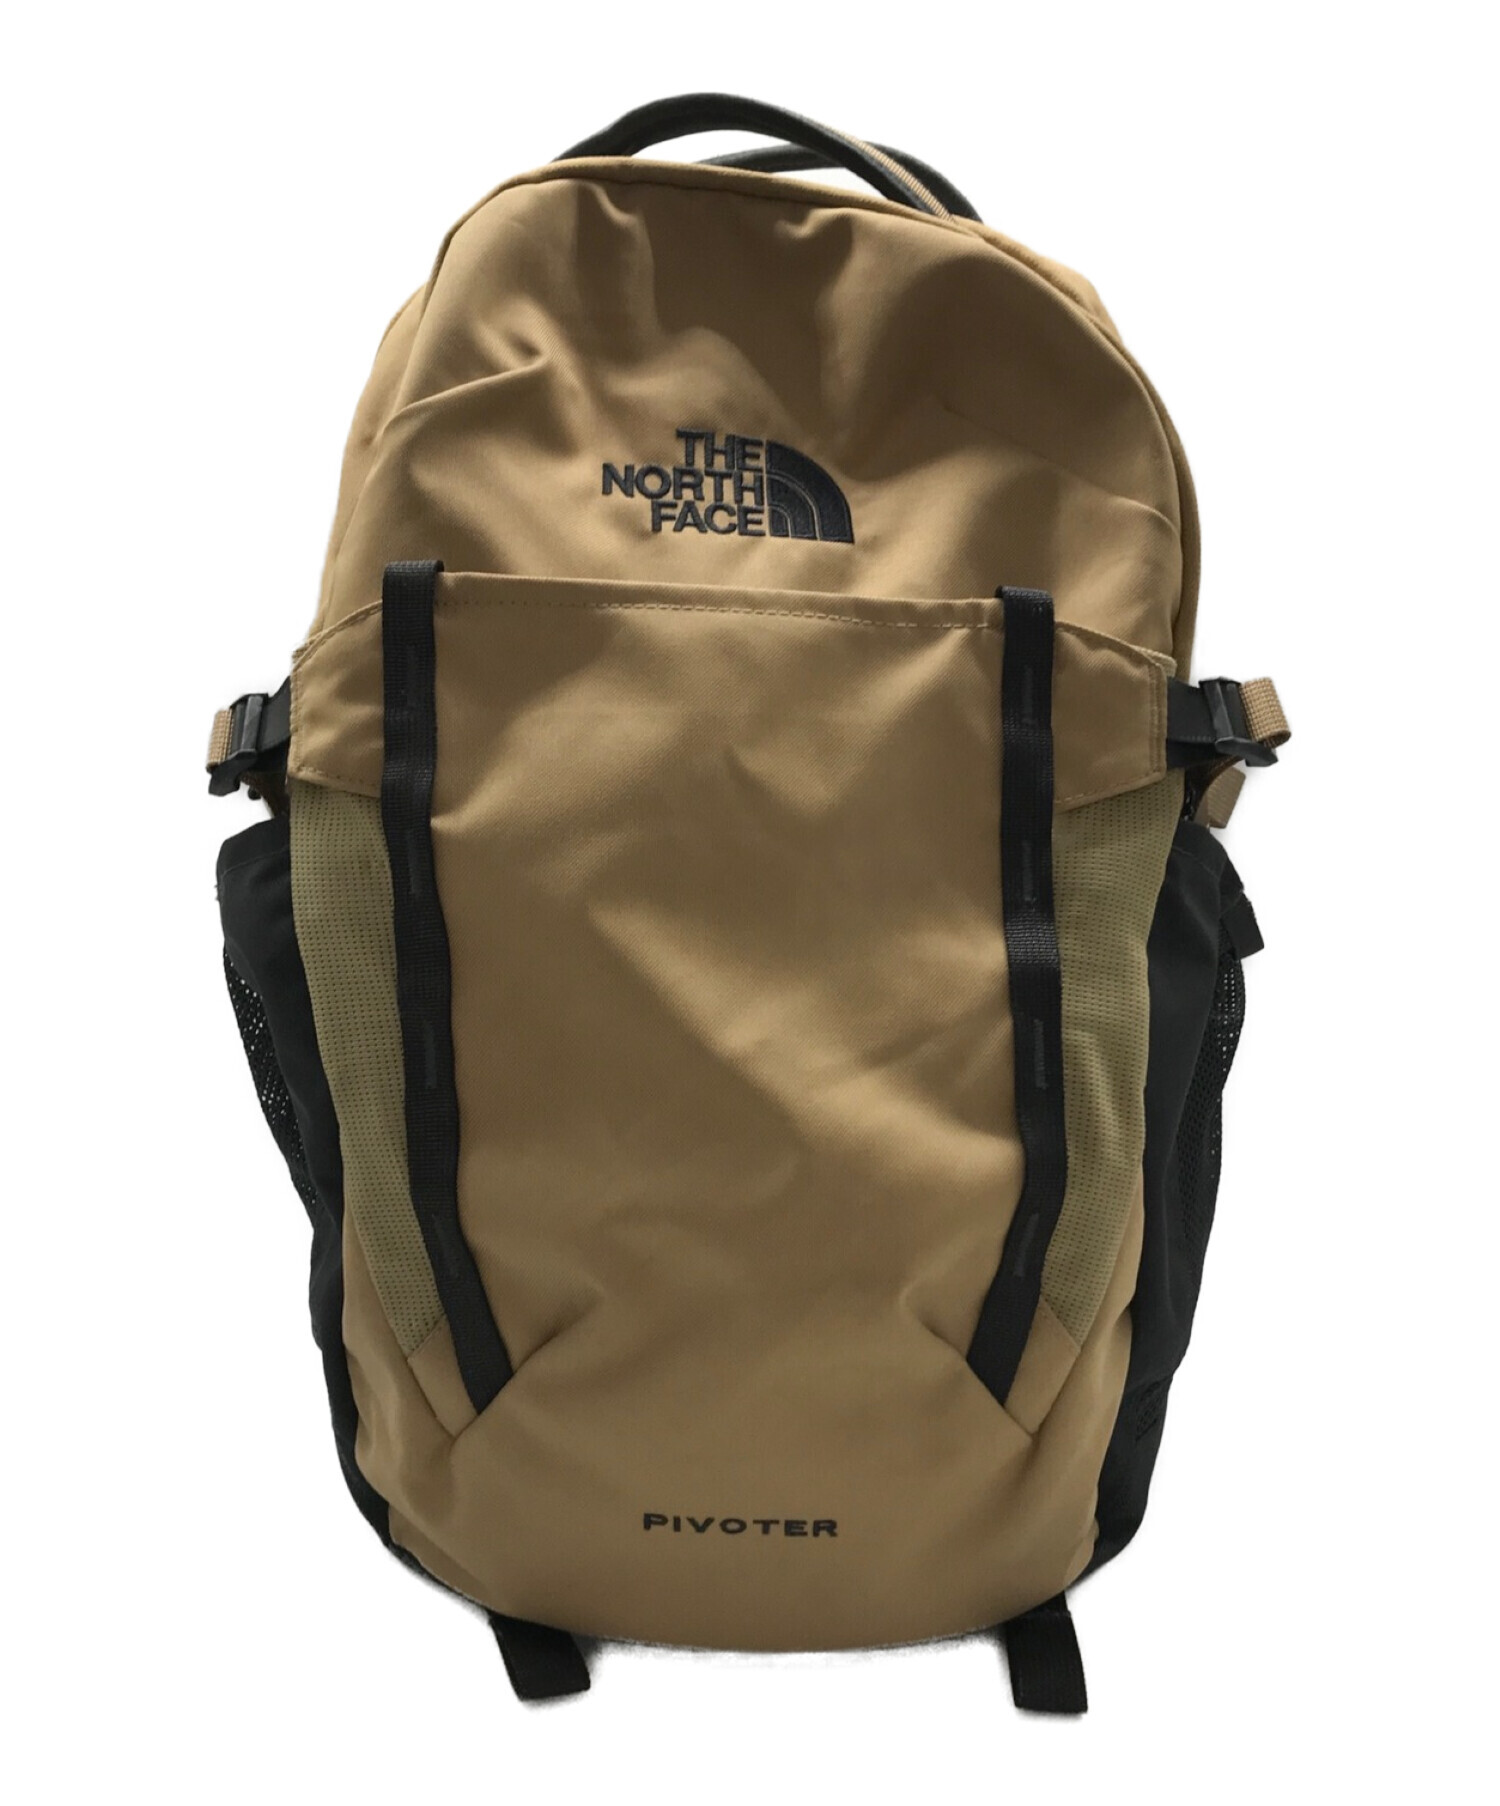 THE NORTH FACE PIVOTER リュックサック